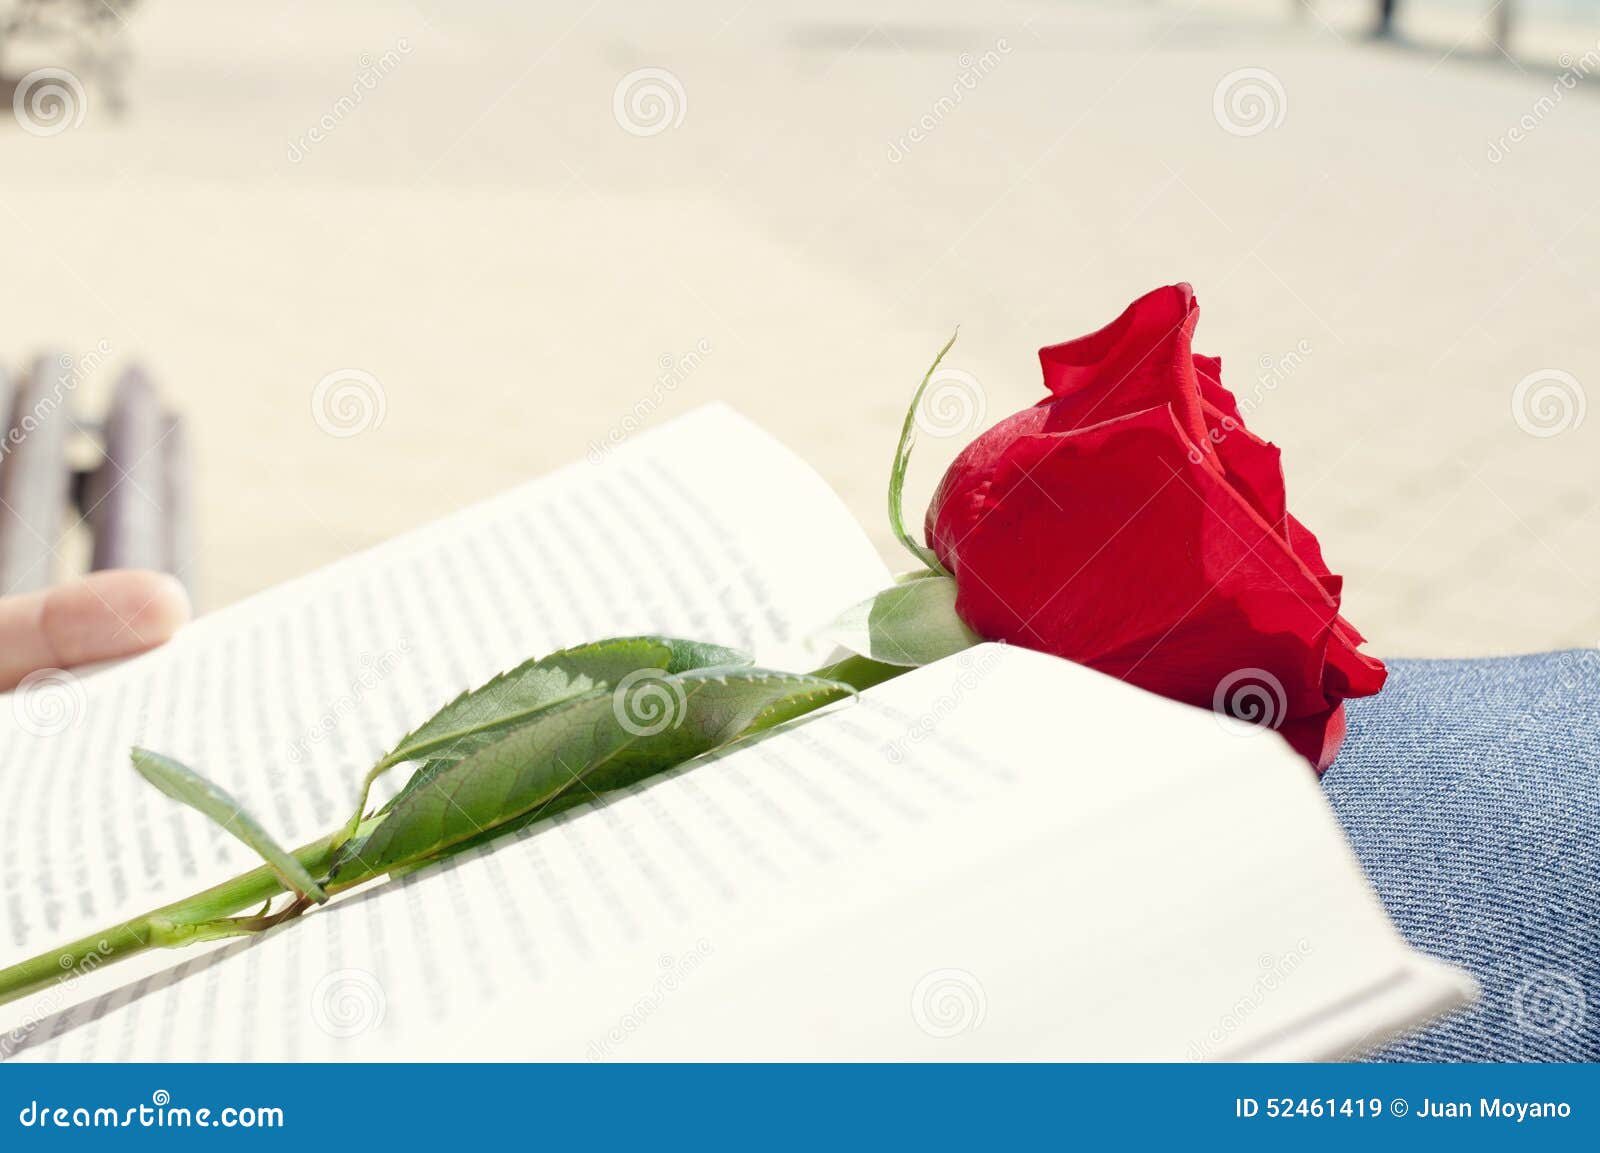 Book and red rose for Sant Jordi, Saint Georges Day, in Cataloni. Closeup of a young man with a red rose on an open book for Sant Jordi, the Saint Georges Day, when it is tradition to give red roses and books in Catalonia, Spain